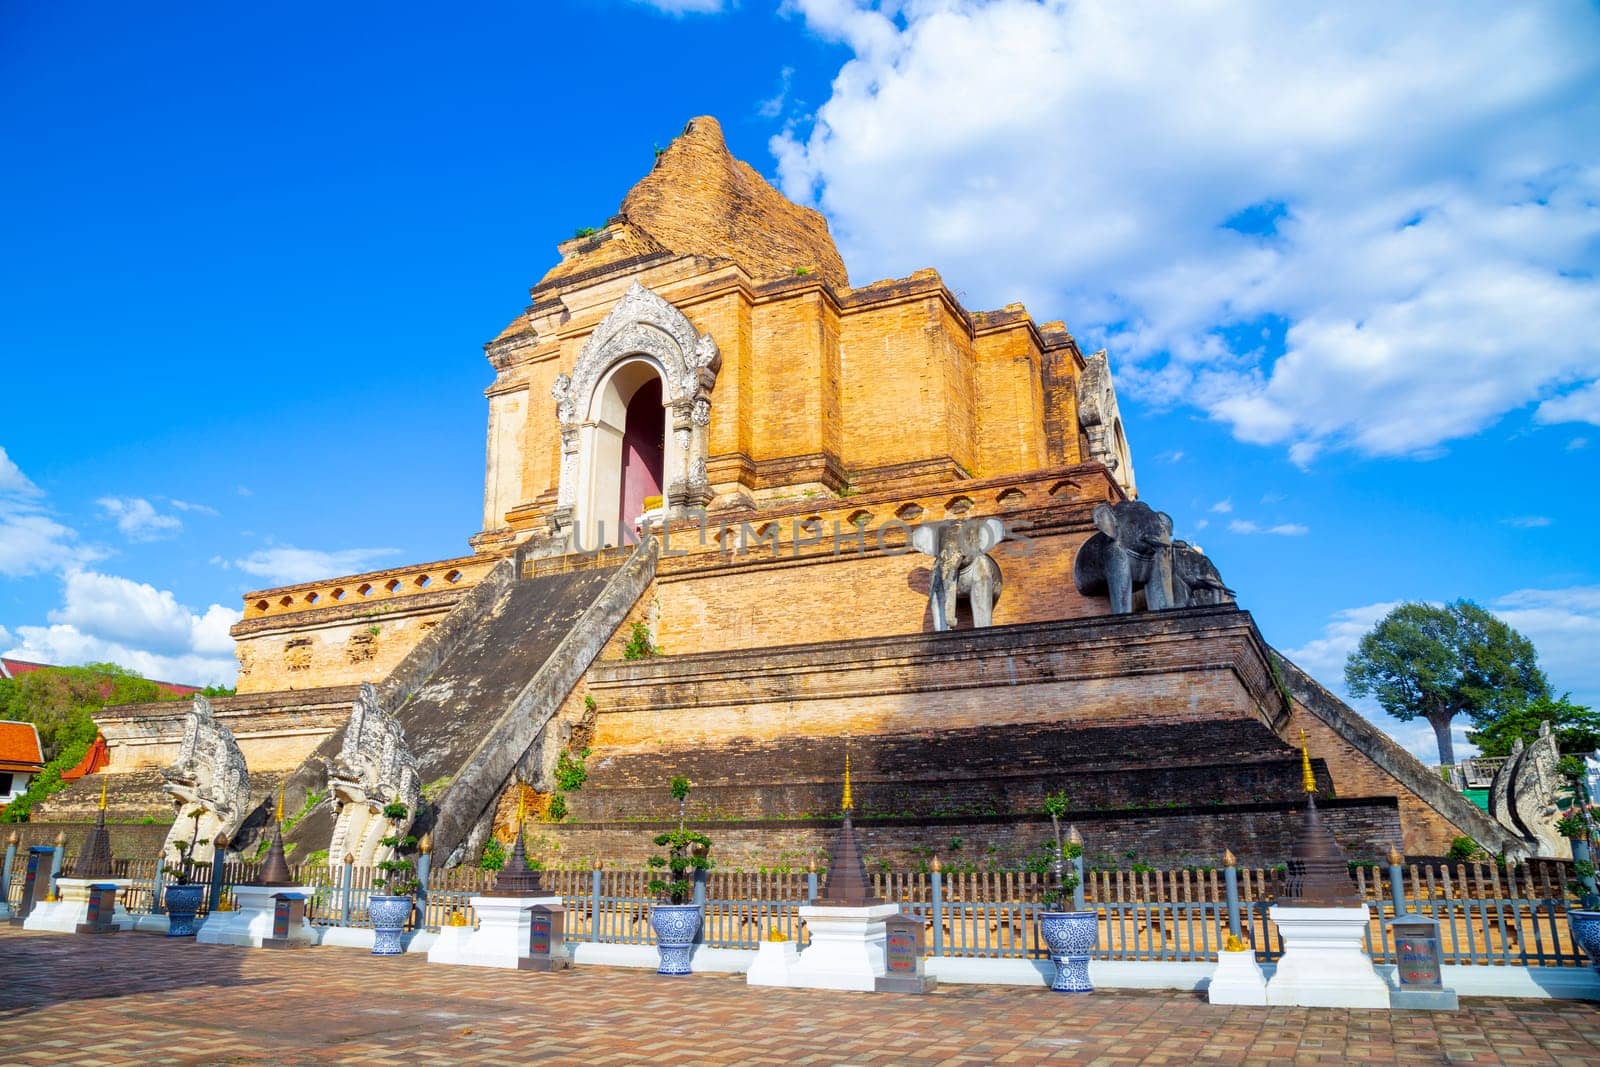 Wat Chedi Luang Temple, famous ruined ancient pagoda in Chiang Mai, north of Thailand